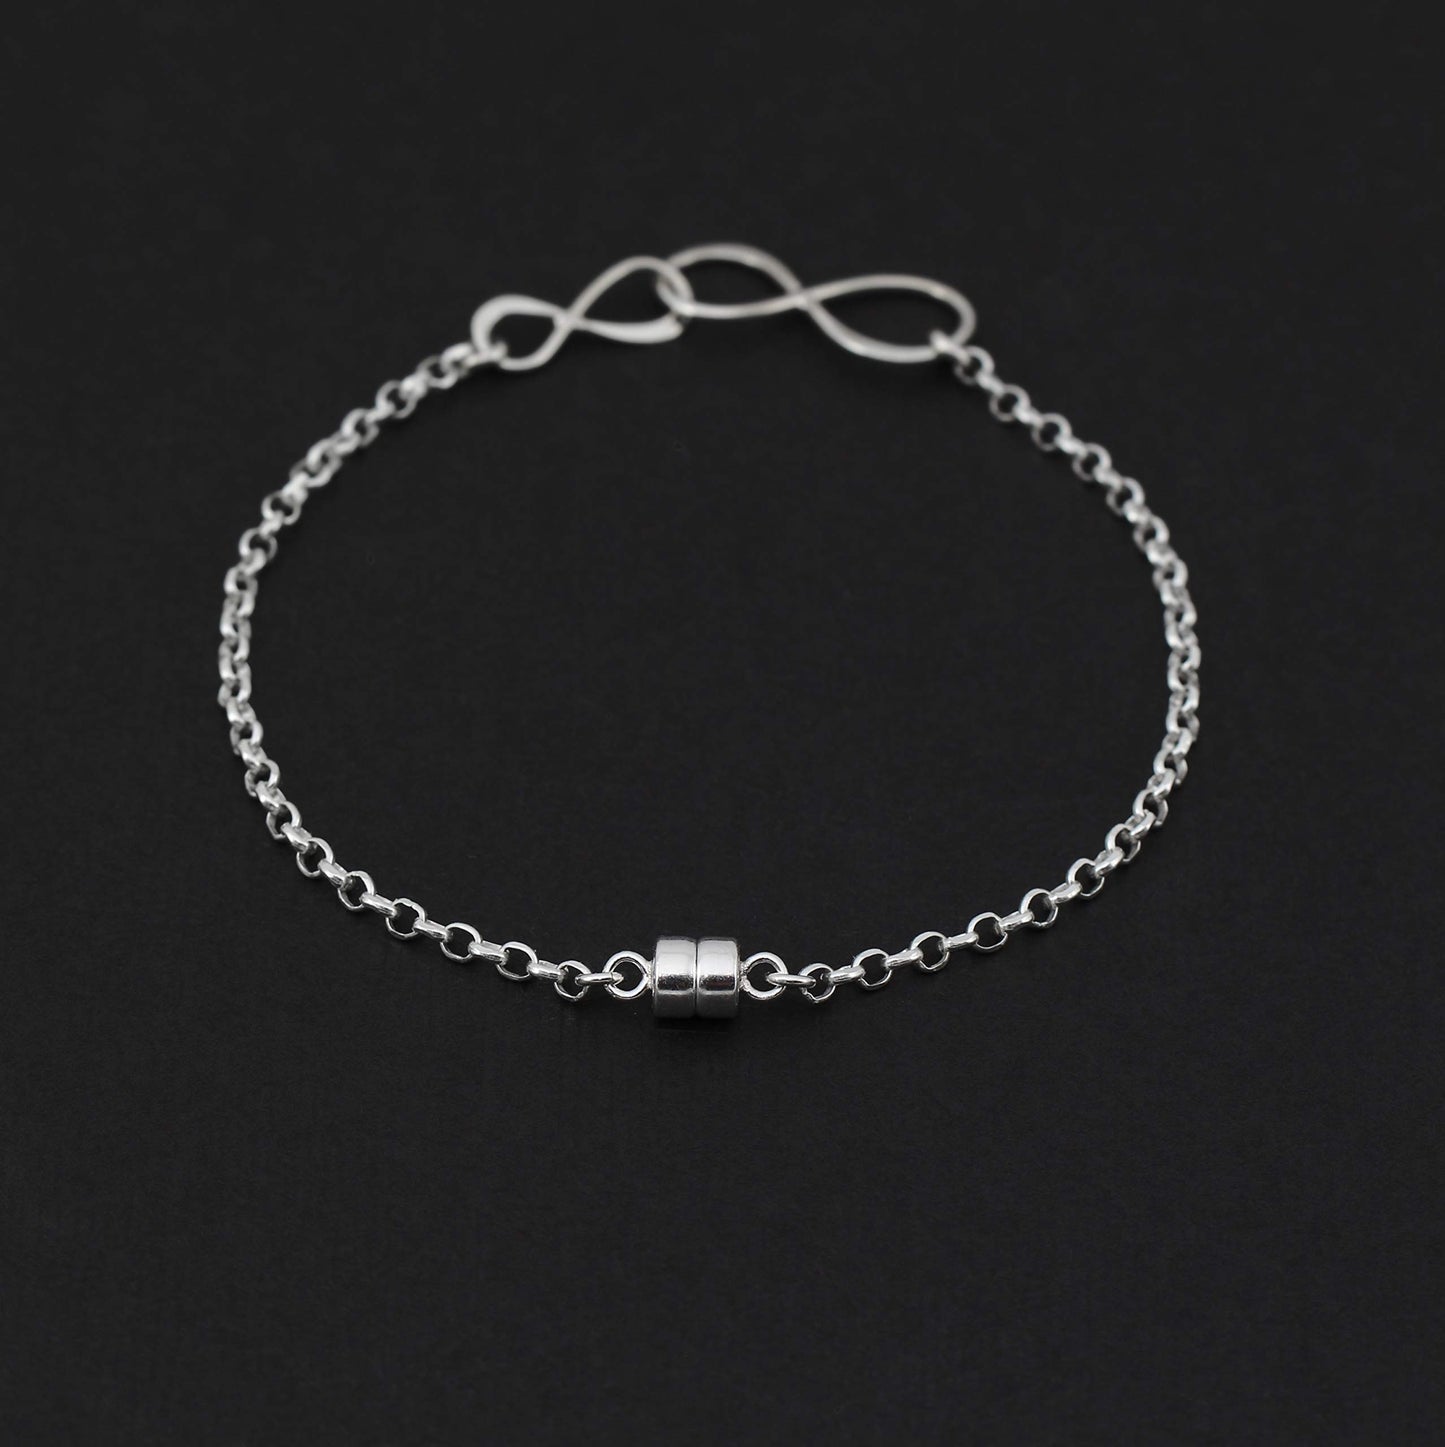 A Charmed Impression Grandmother Grandson Gifts • Silver Bracelet with Magnetic Clasp • Two Connected Infinity Links • Handmade Jewelry for Women